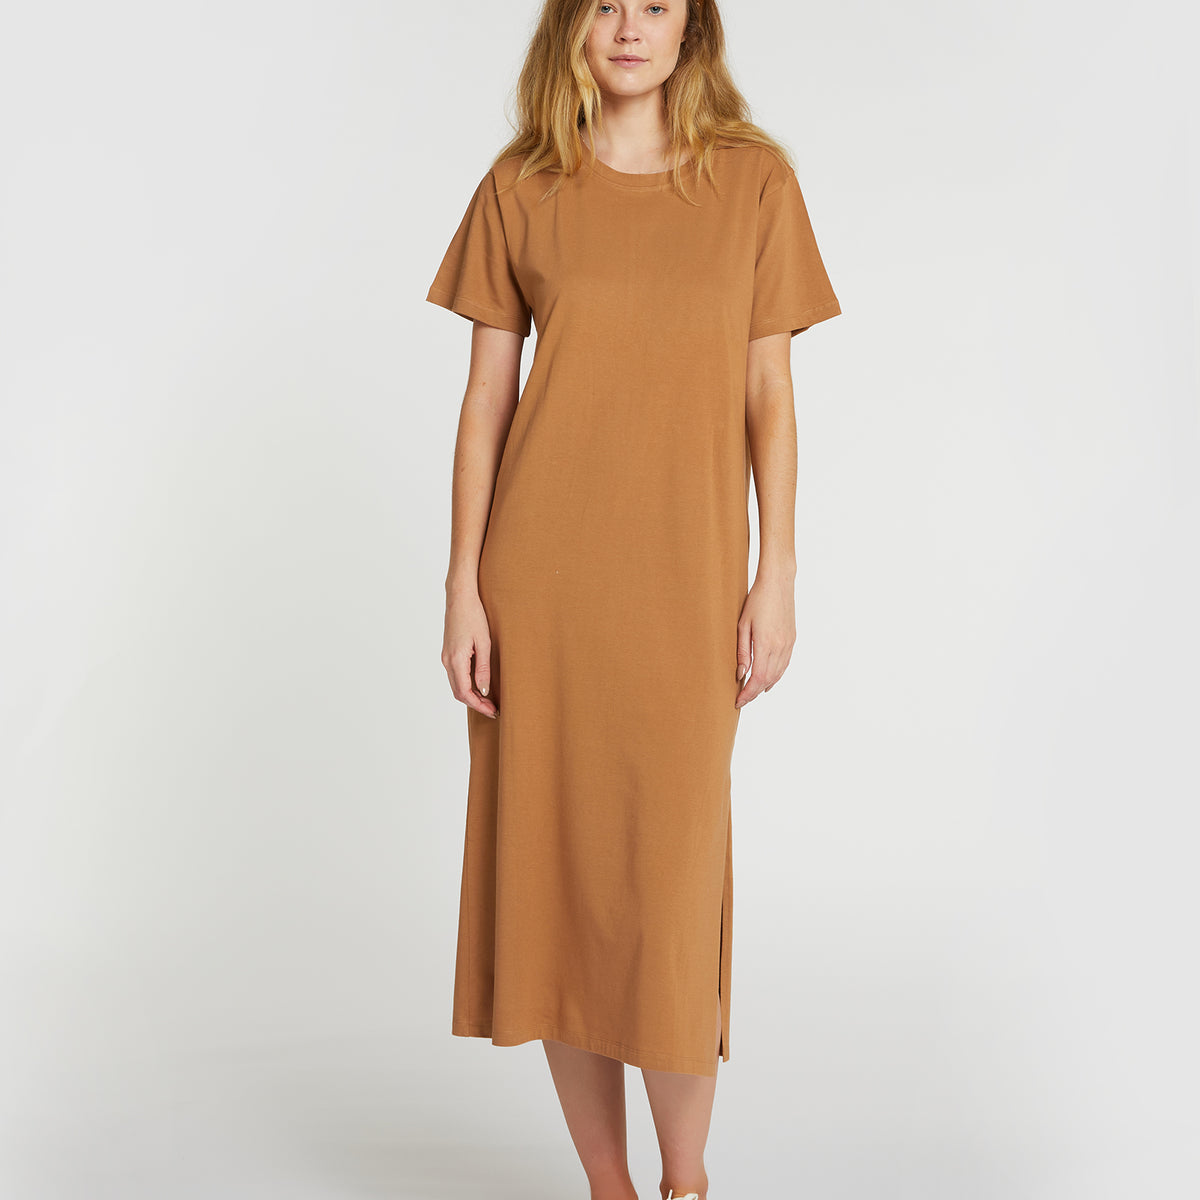 Boxy Tee Dress, Tobacco Brown  100% Organic & Ethically Made Dresses –  Cloth & Co.